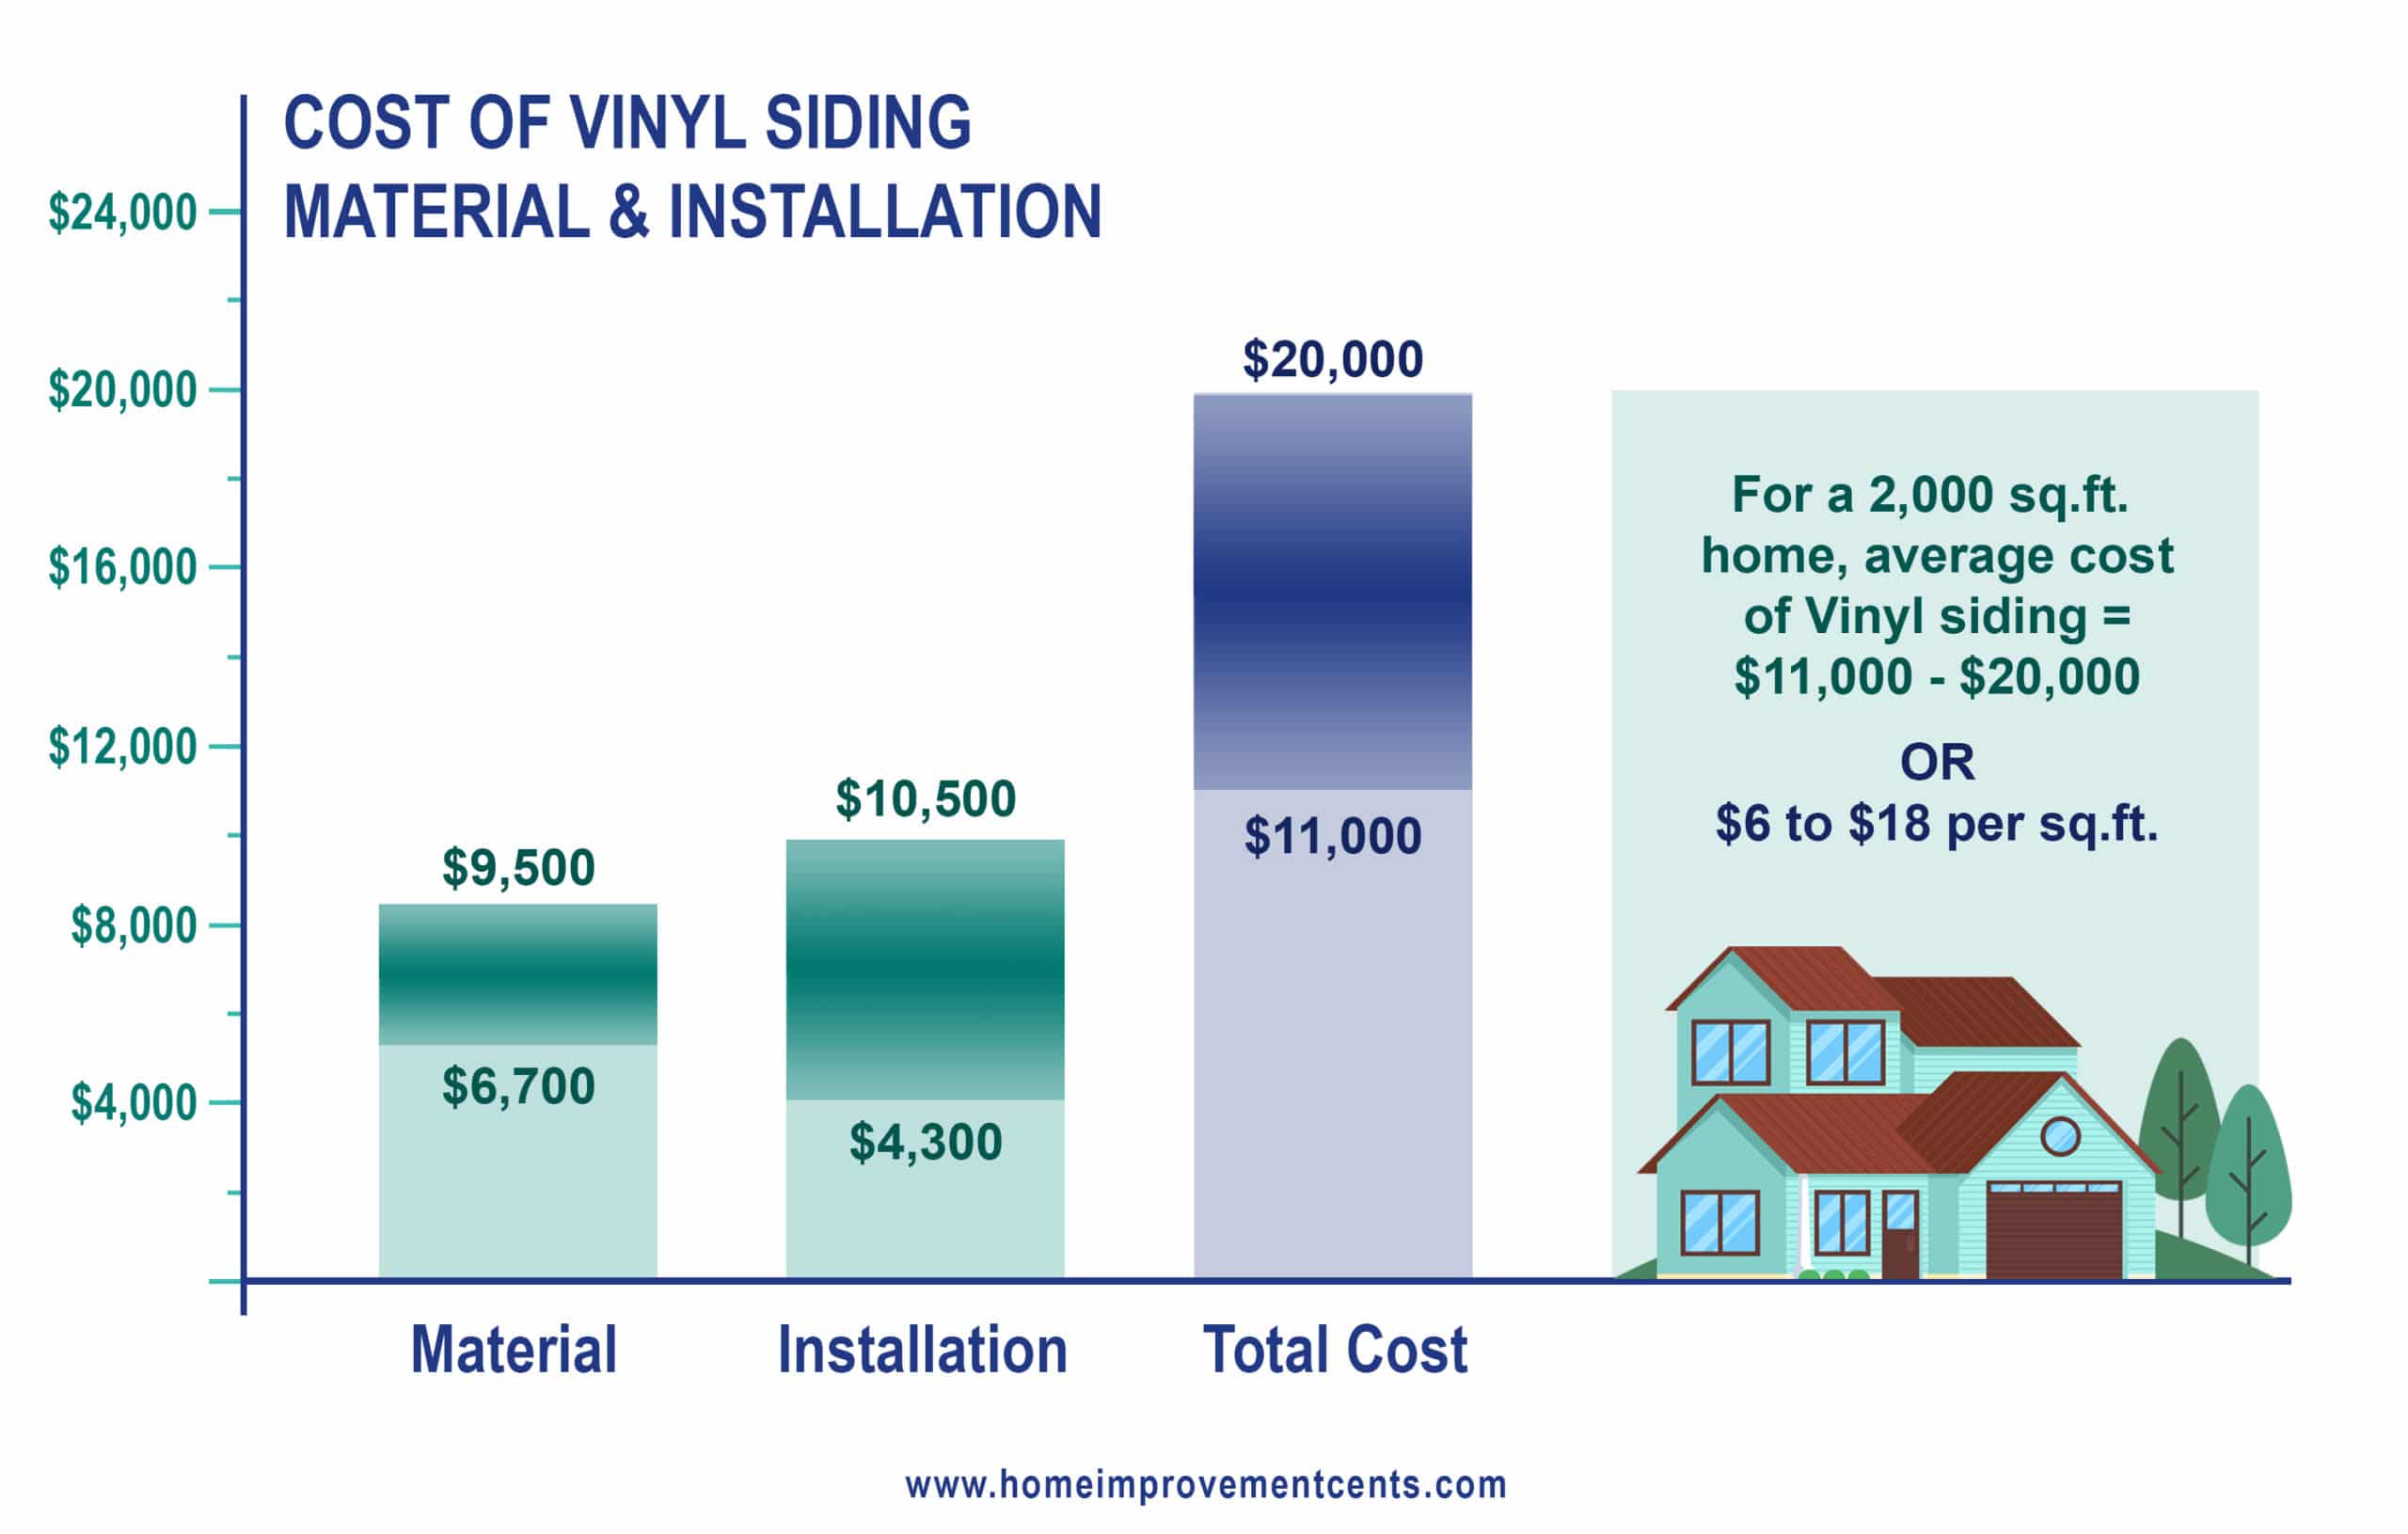 Cost overview graph of vinyl siding